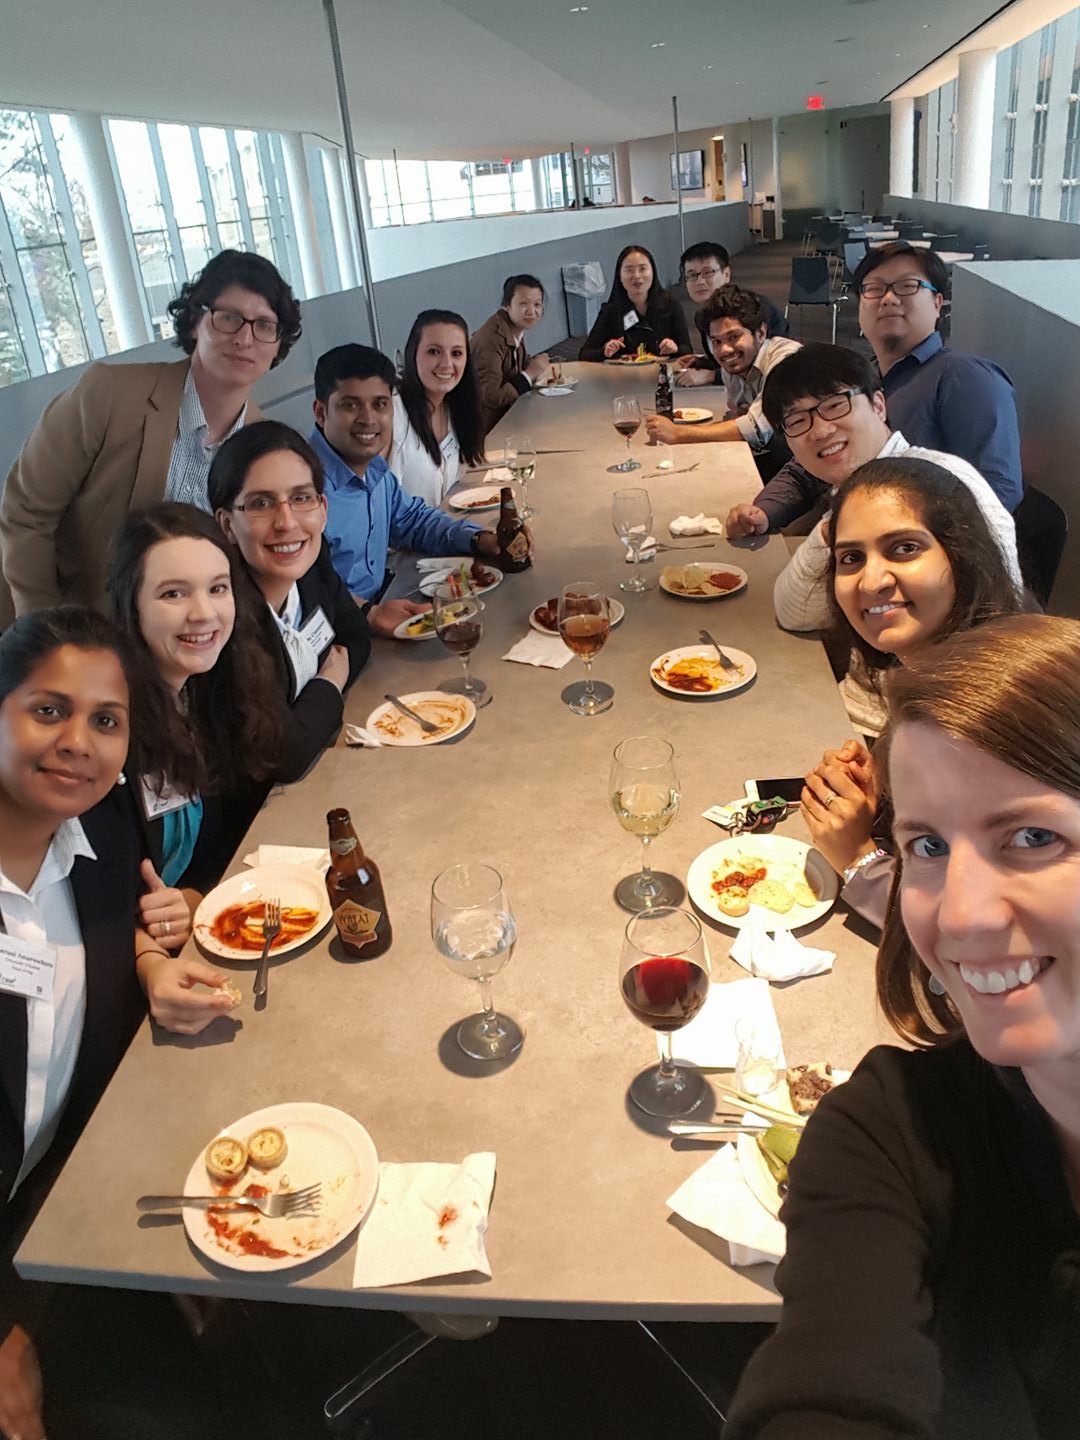 A group of people gathered around a meal, all smiling and participating in a group selfie taken on one individual's phone.